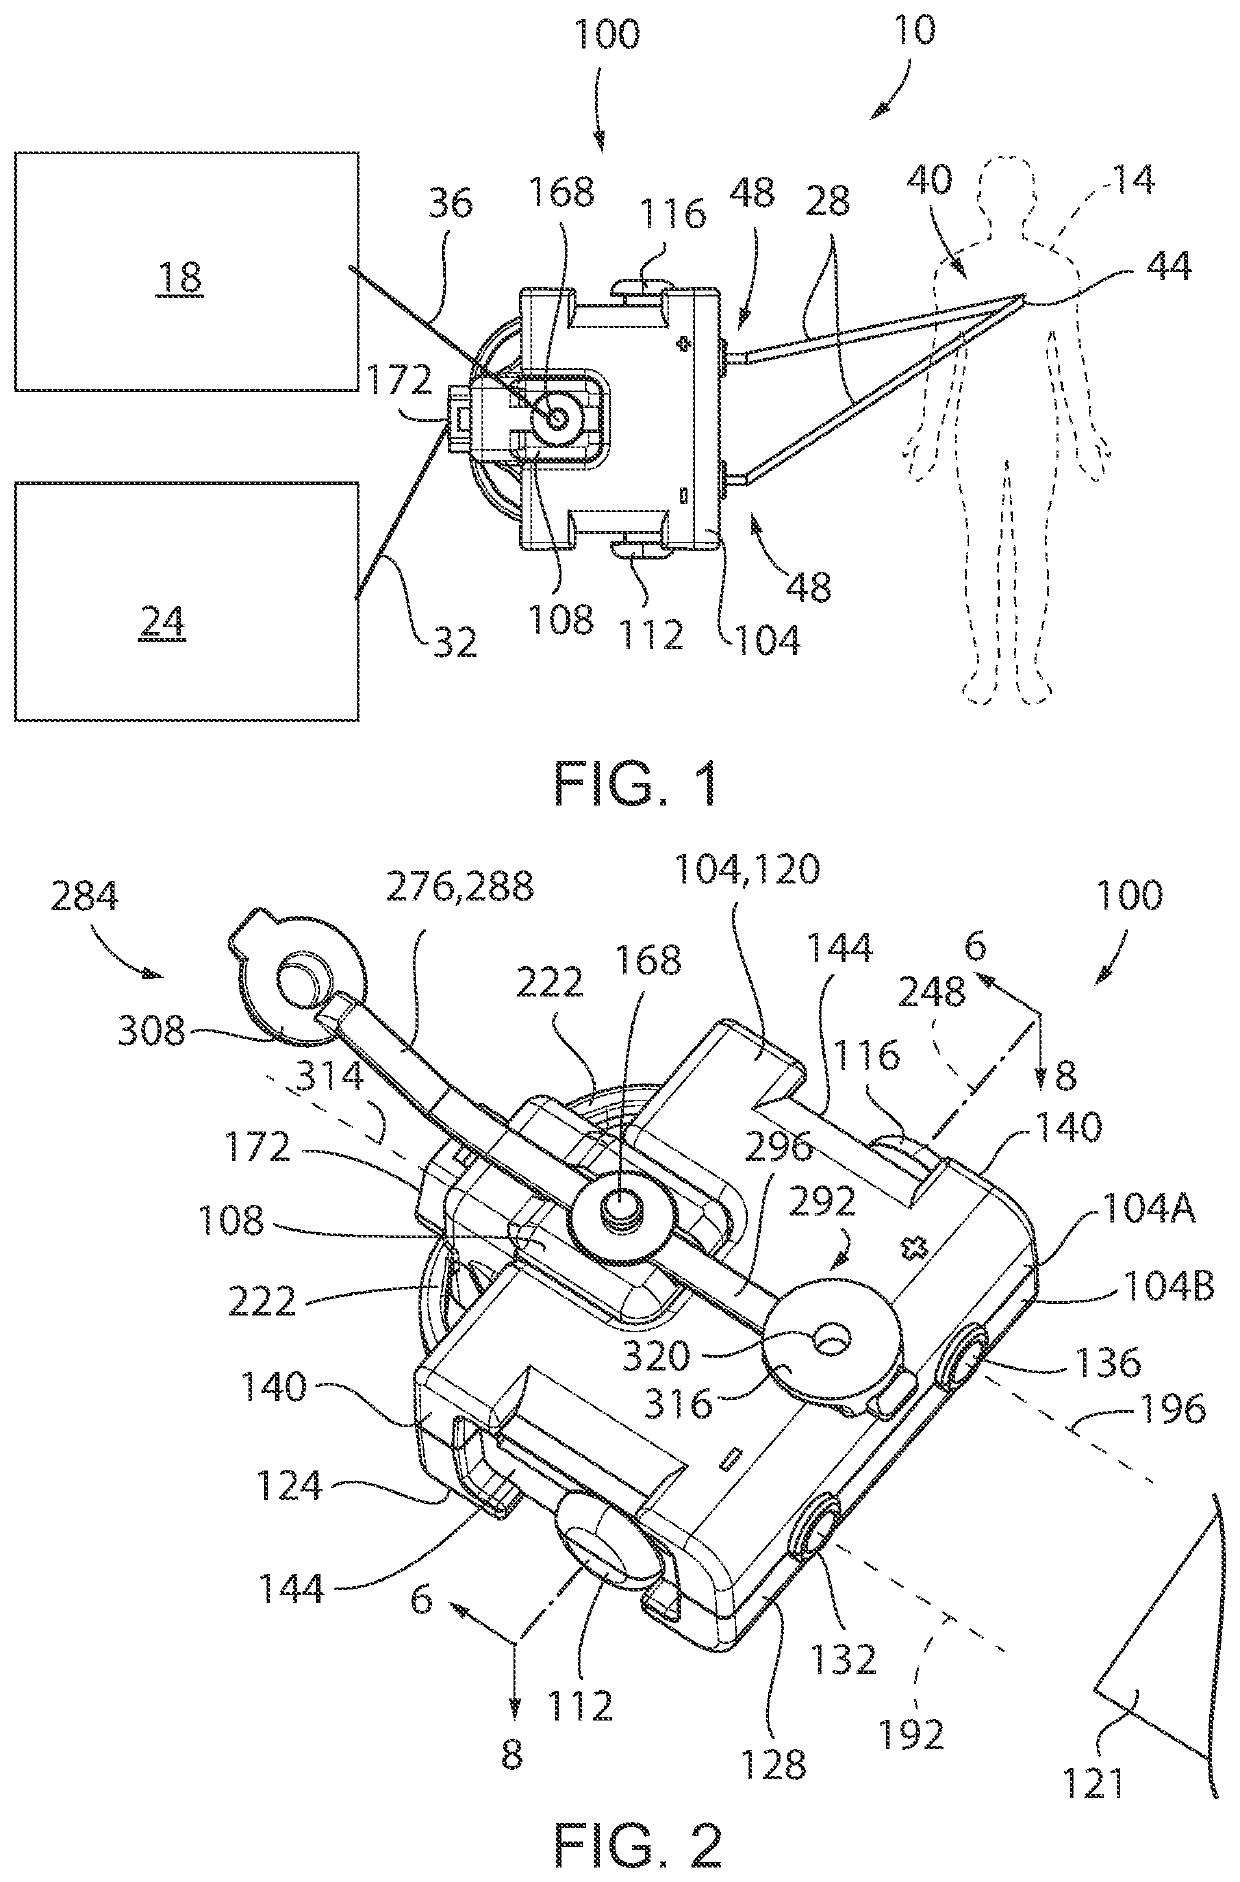 Electrical Connector and Cover for Simultaneously Connecting Wires, Bedside Monitor, and Temporary Pacemaker